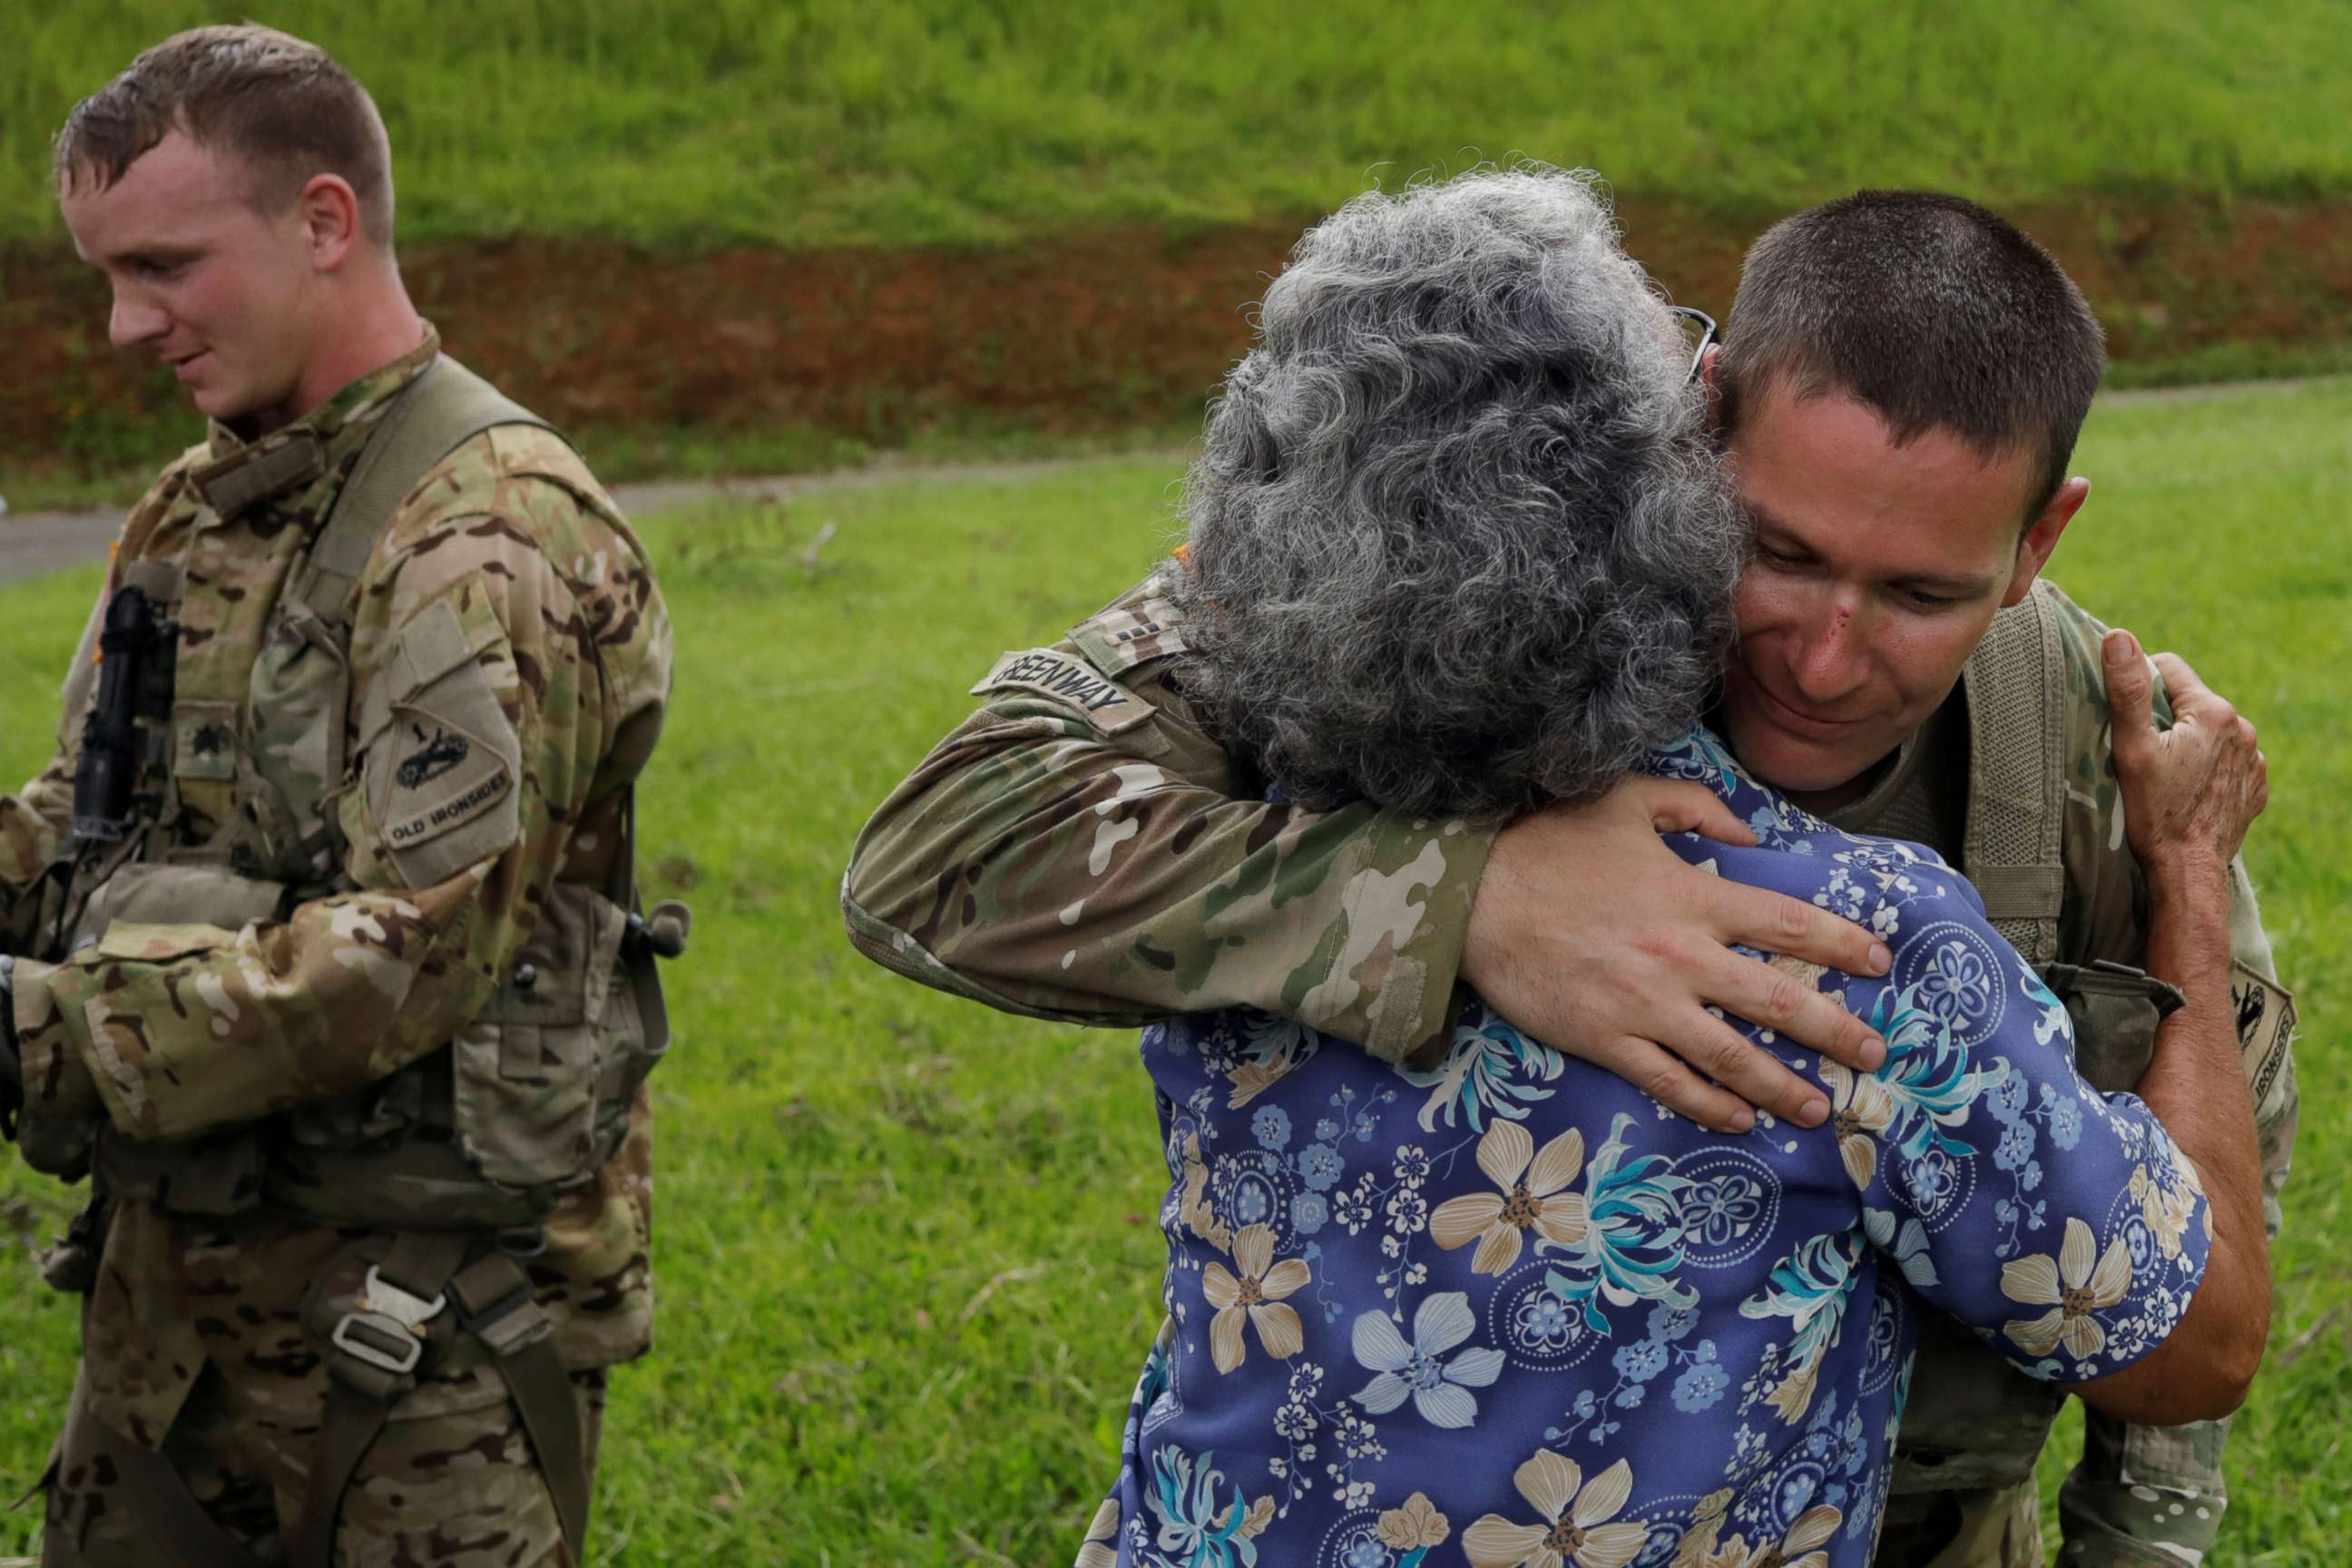 PHOTO: UH-60 Blackhawk helicopter pilot Chris Greenway receives a hug from a woman thanking him for water during recovery efforts following Hurricane Maria, in Verde de Comerio, Puerto Rico, Oct. 7, 2017.